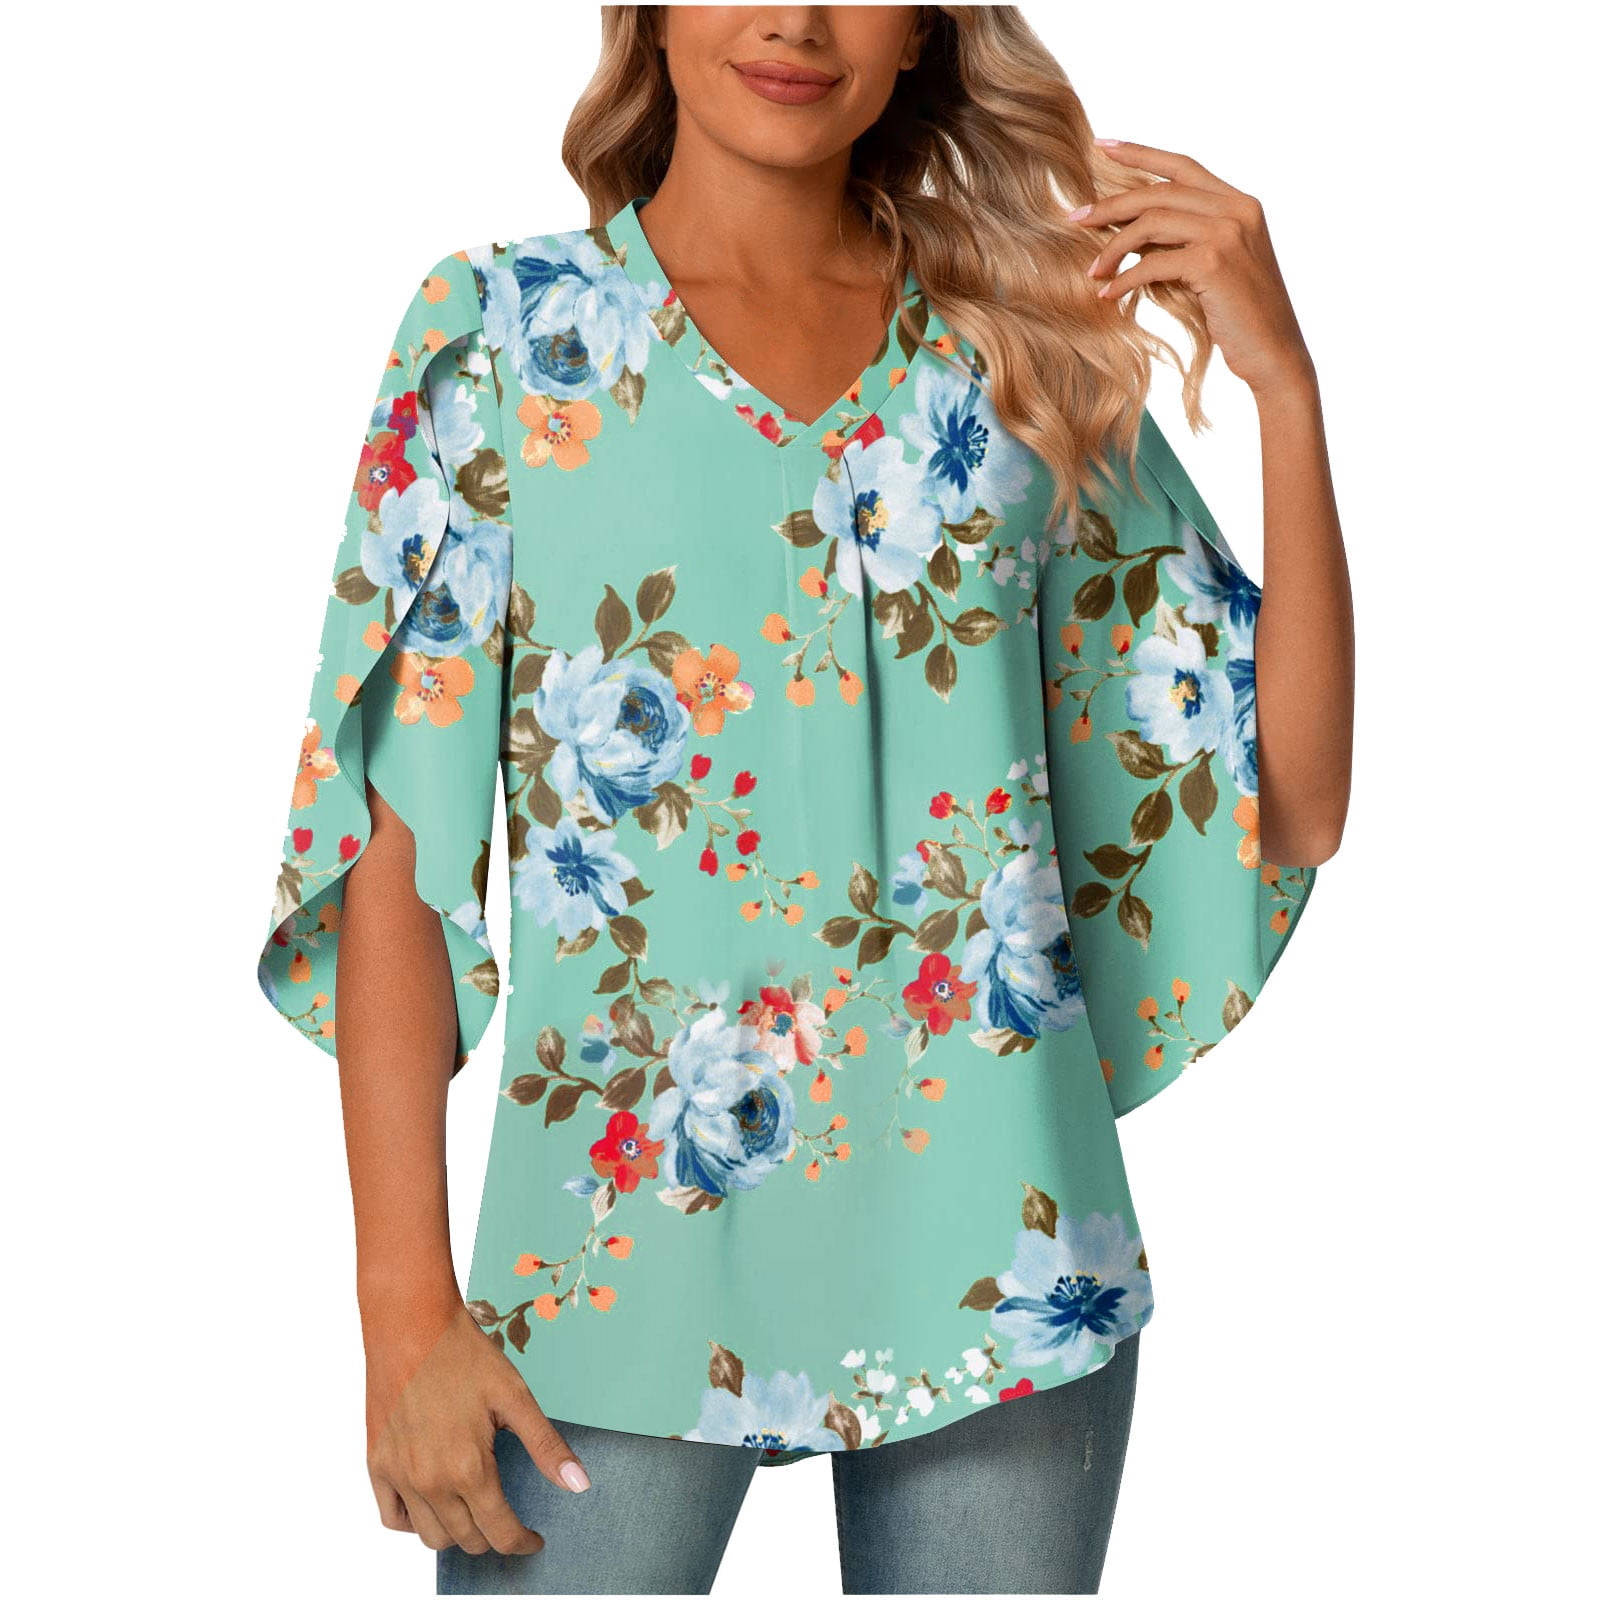 ZVAVZ Sexy Tops for Women Plus Size for Sex Womens Tops Hide Belly Womens Casual Vintage Graphic Printed T-shirt Short Sleeve Tops Oversized Loose Tunic V Neck T Shirts for Women Plus